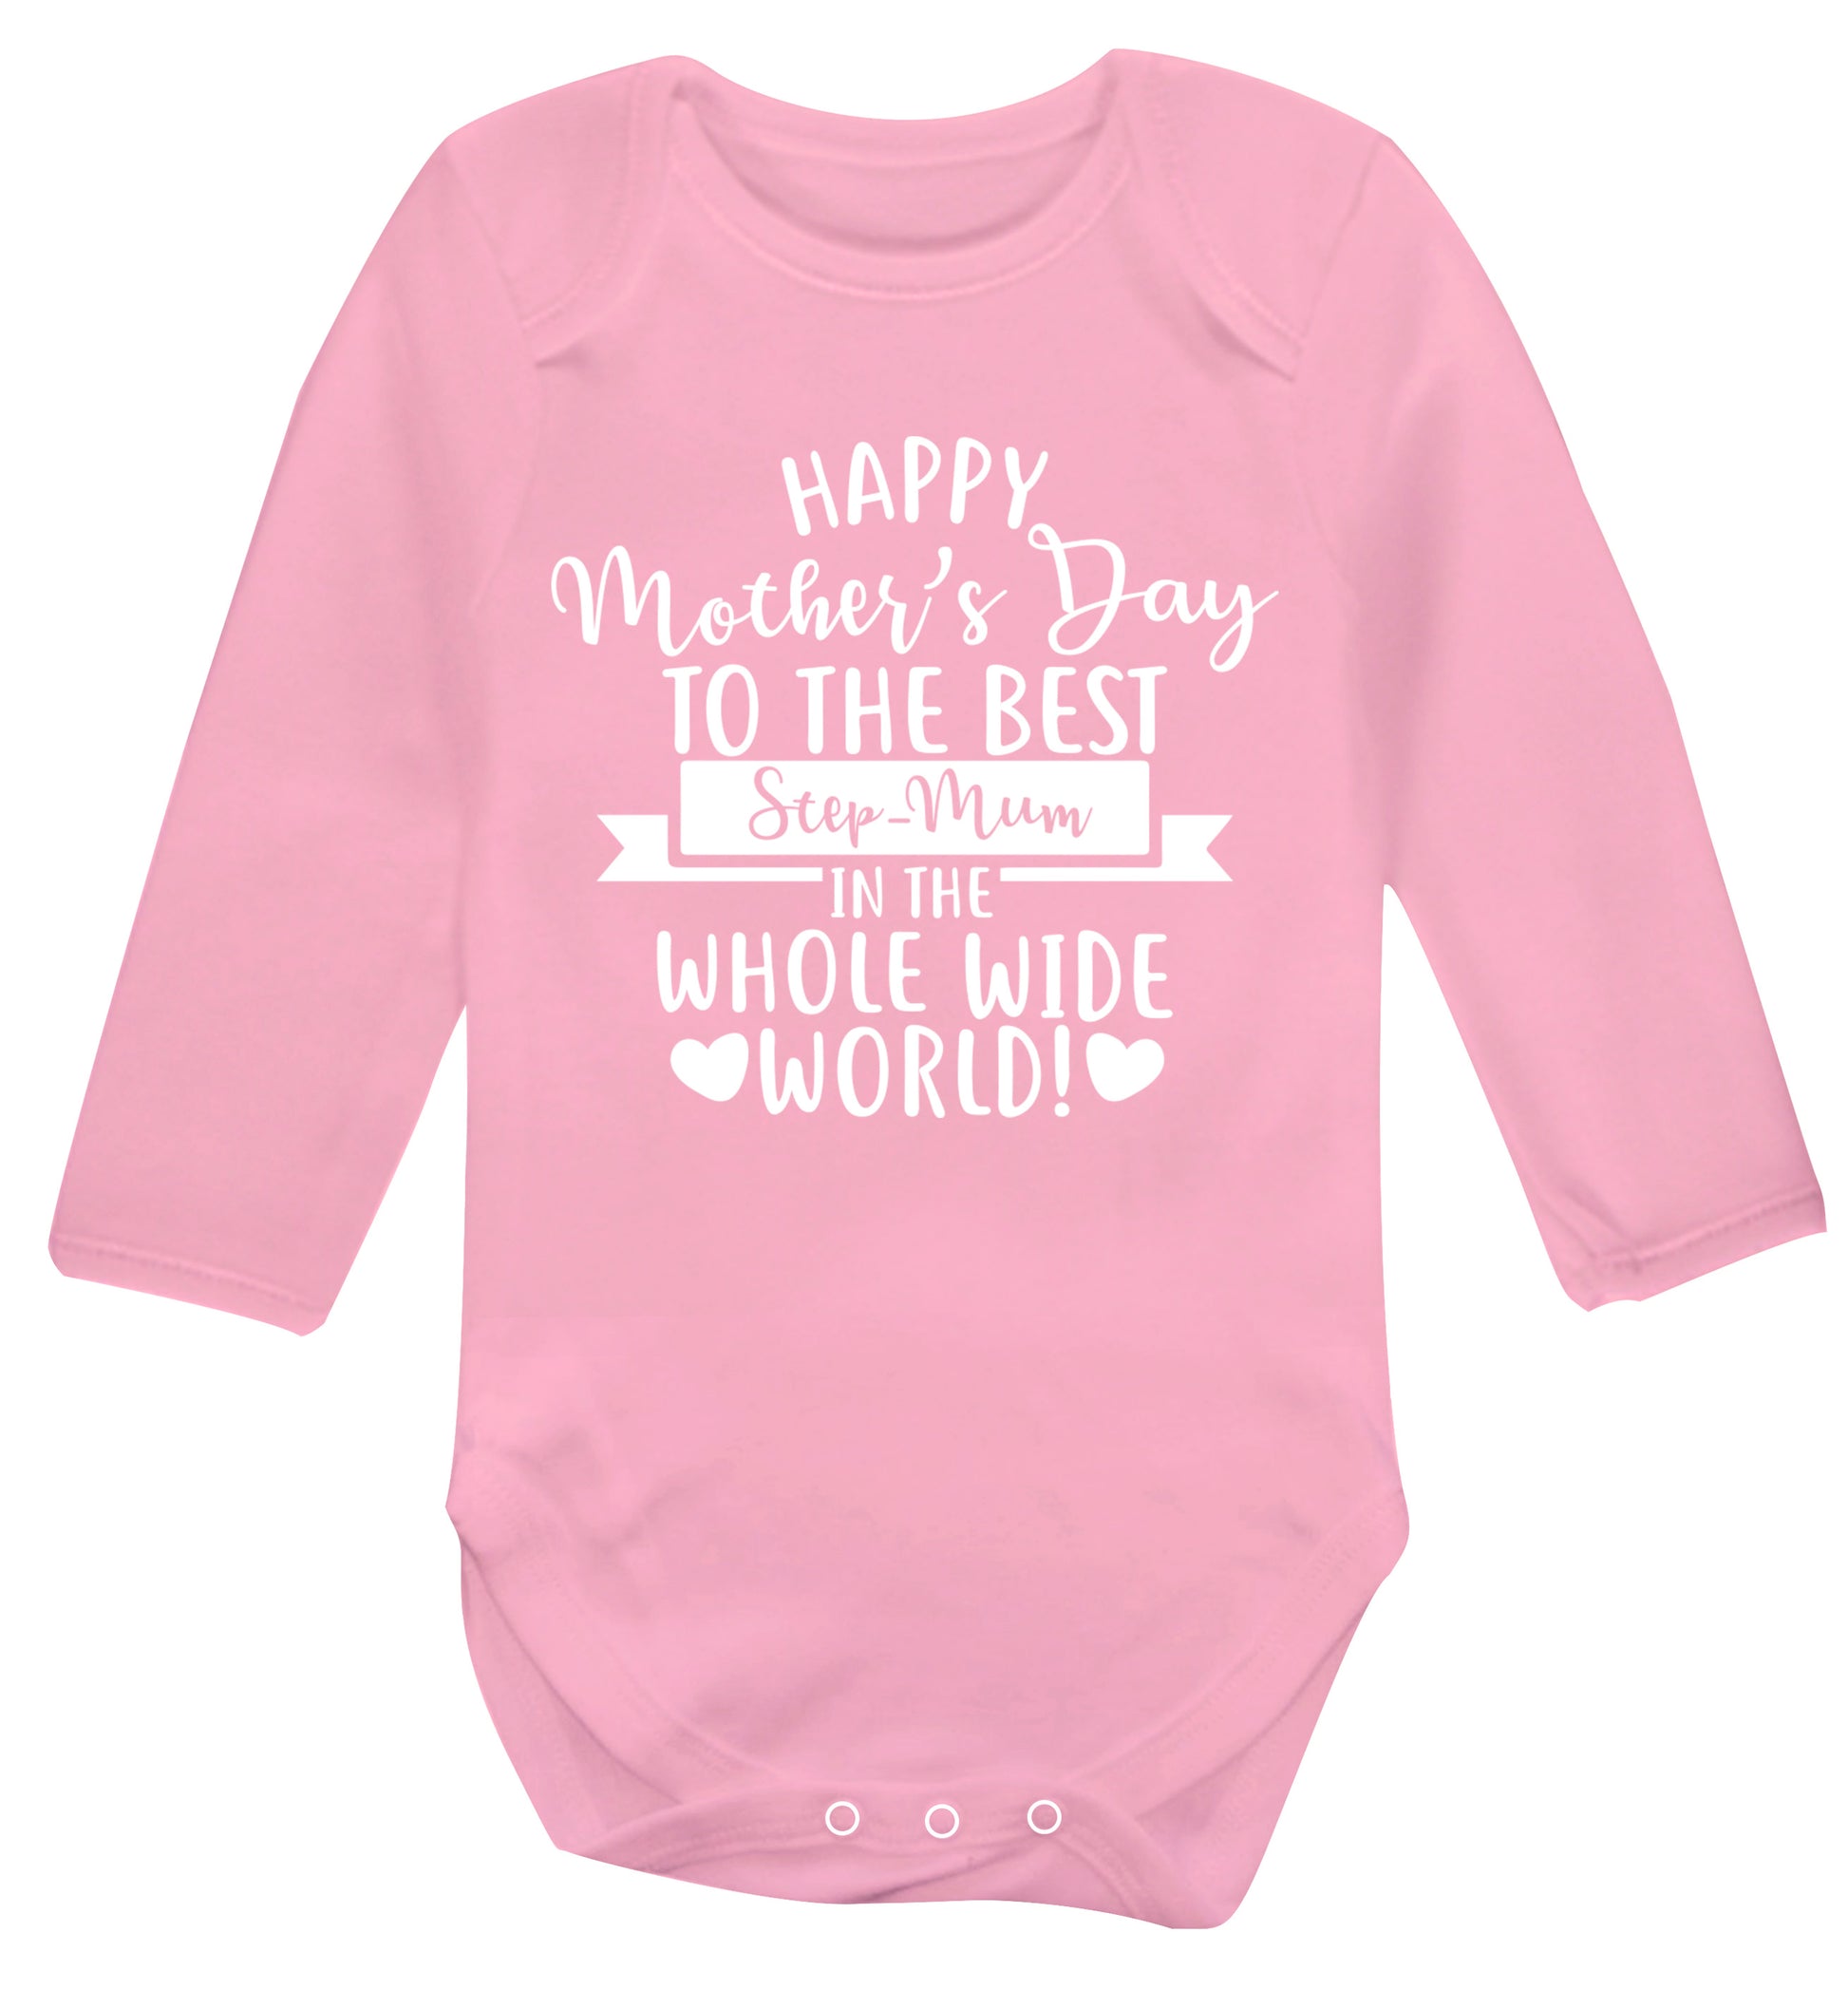 Happy mother's day to the best step-mum in the world Baby Vest long sleeved pale pink 6-12 months